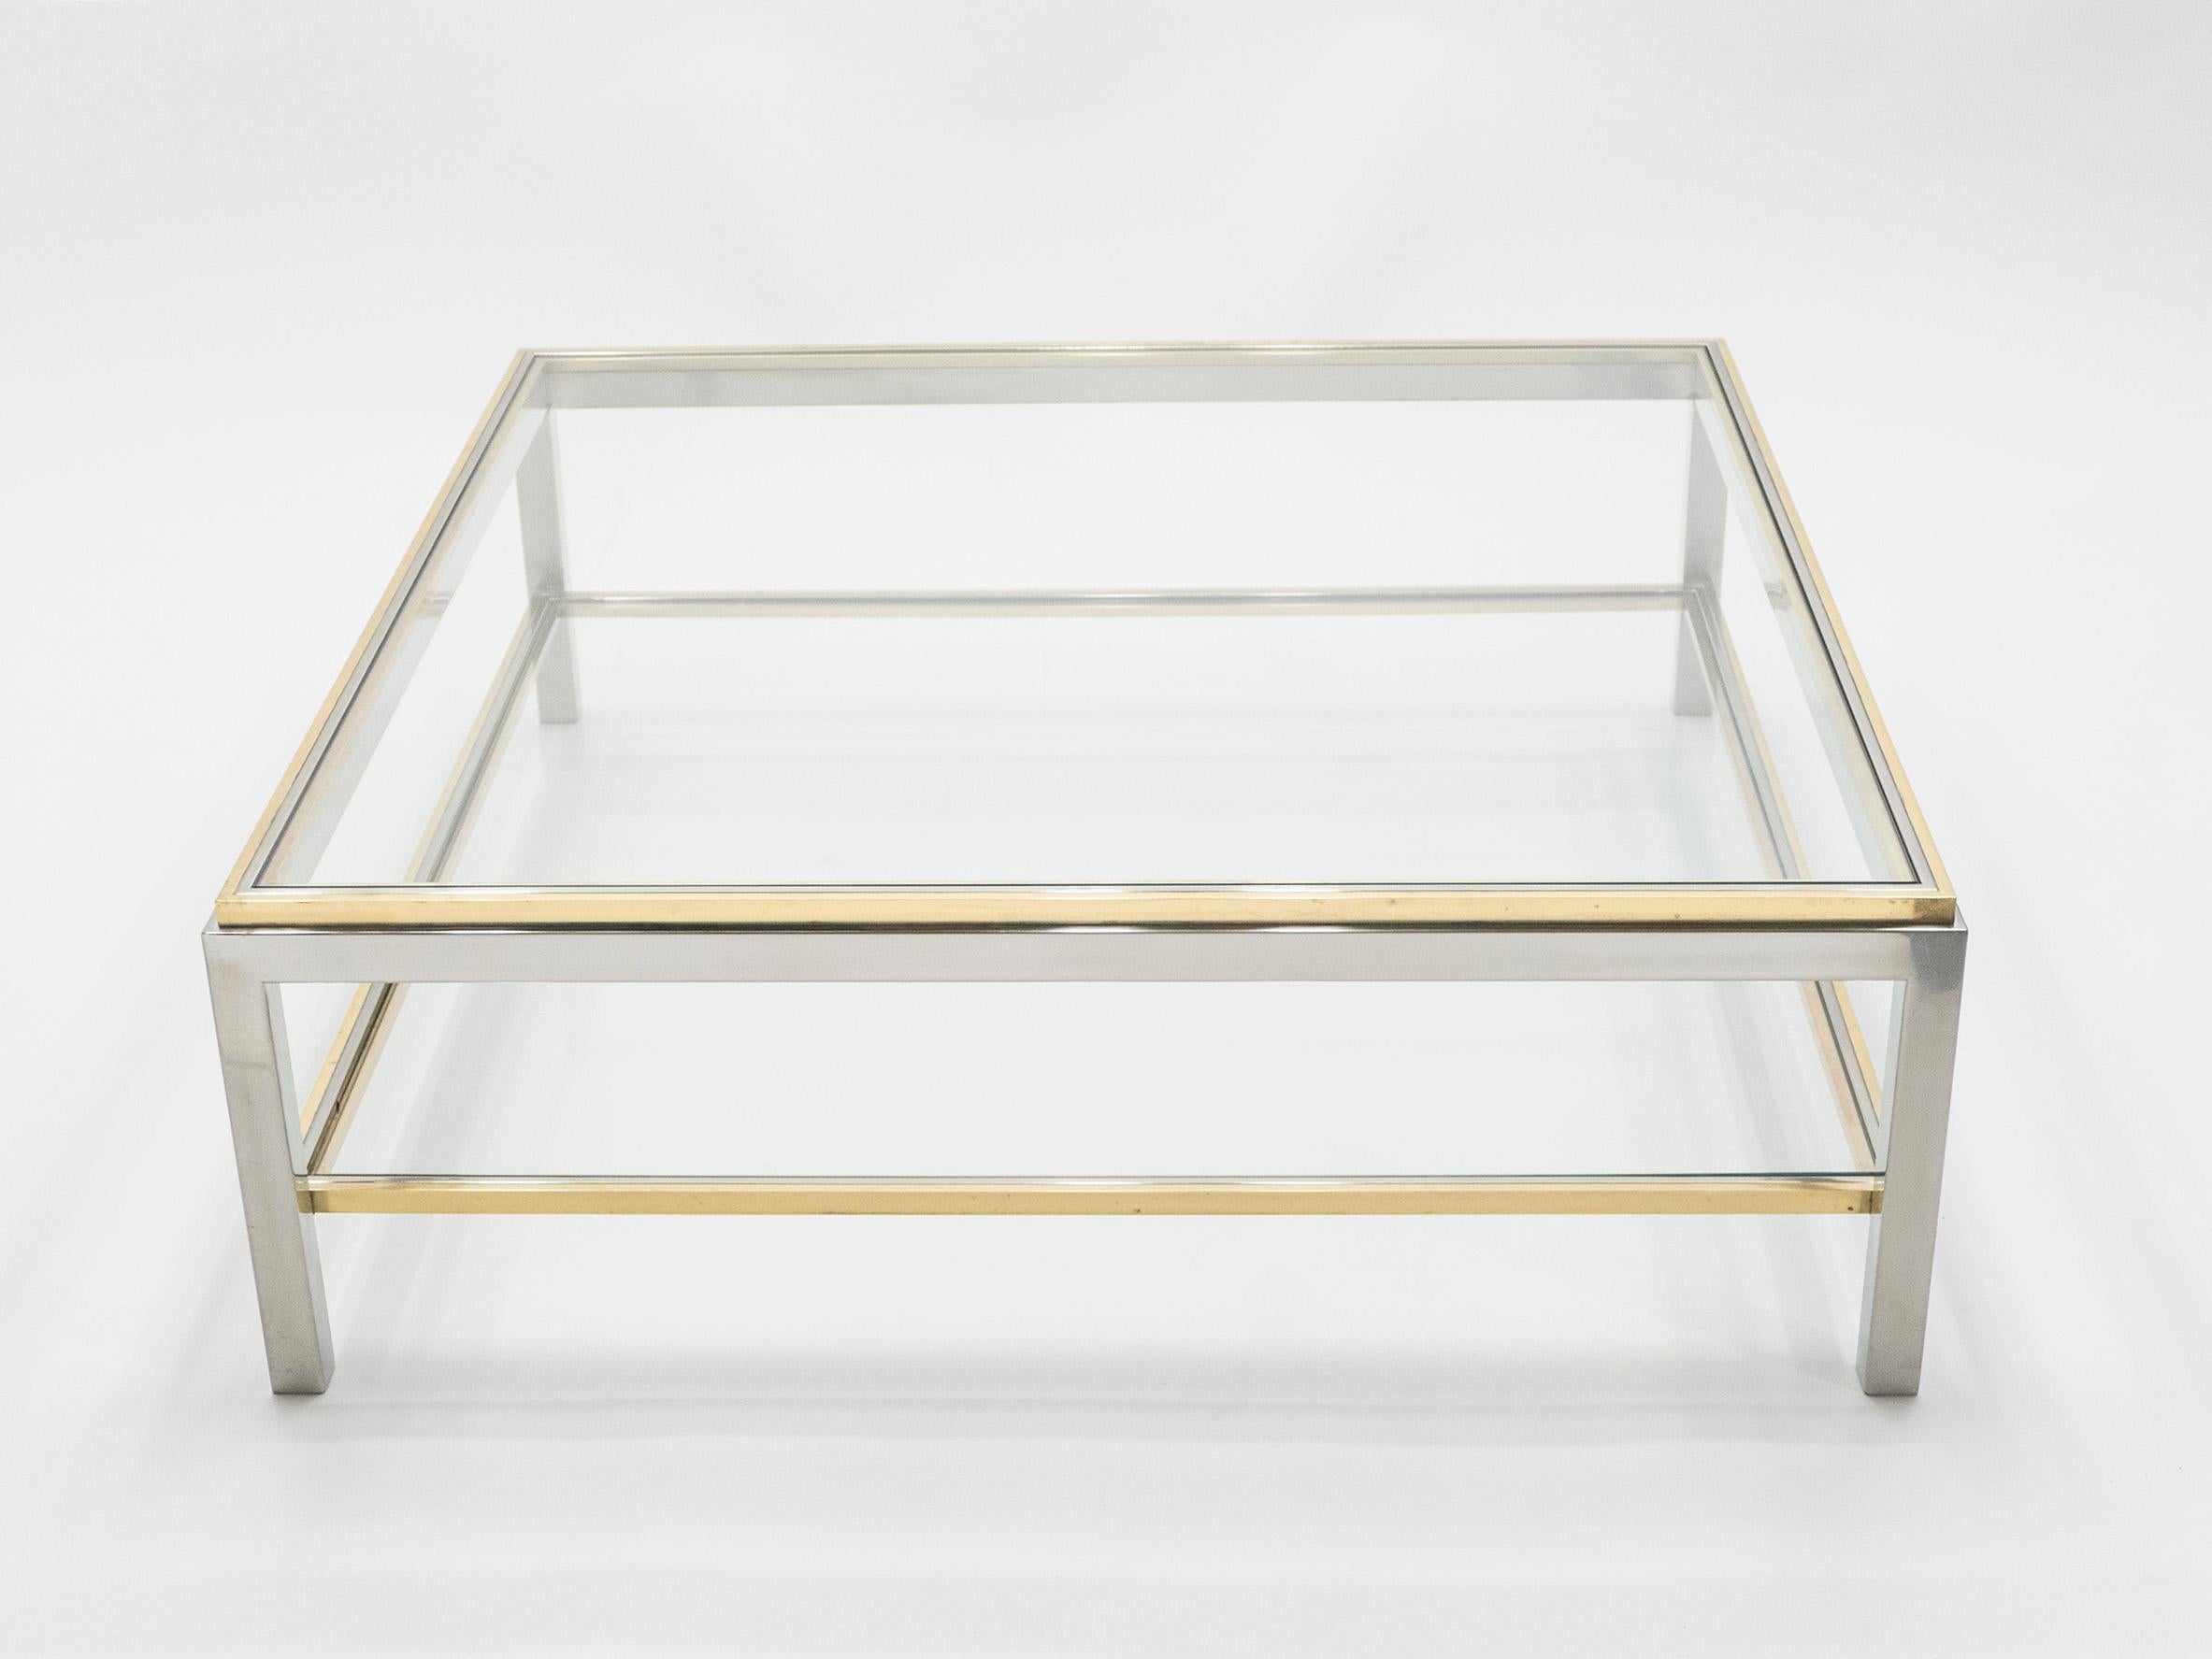 This stunning two-tier square coffee table is guaranteed to be the focus of attention when you entertain guests in your living room. Following the glamorous Italian Hollywood Regency look of other classic Willy Rizzo designs, this Flaminia model